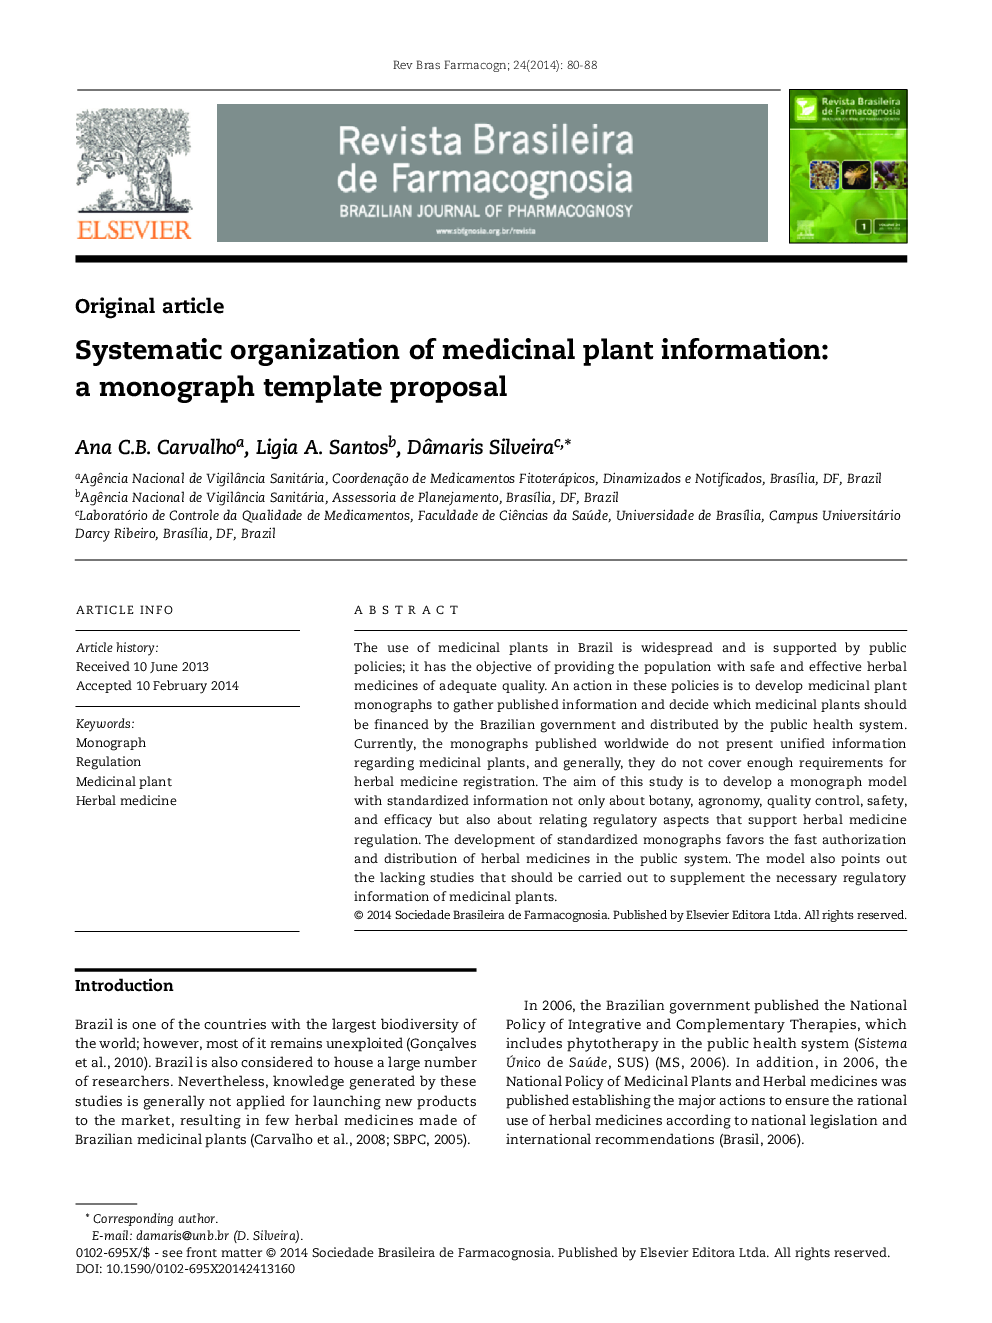 Systematic organization of medicinal plant information: a monograph template proposal